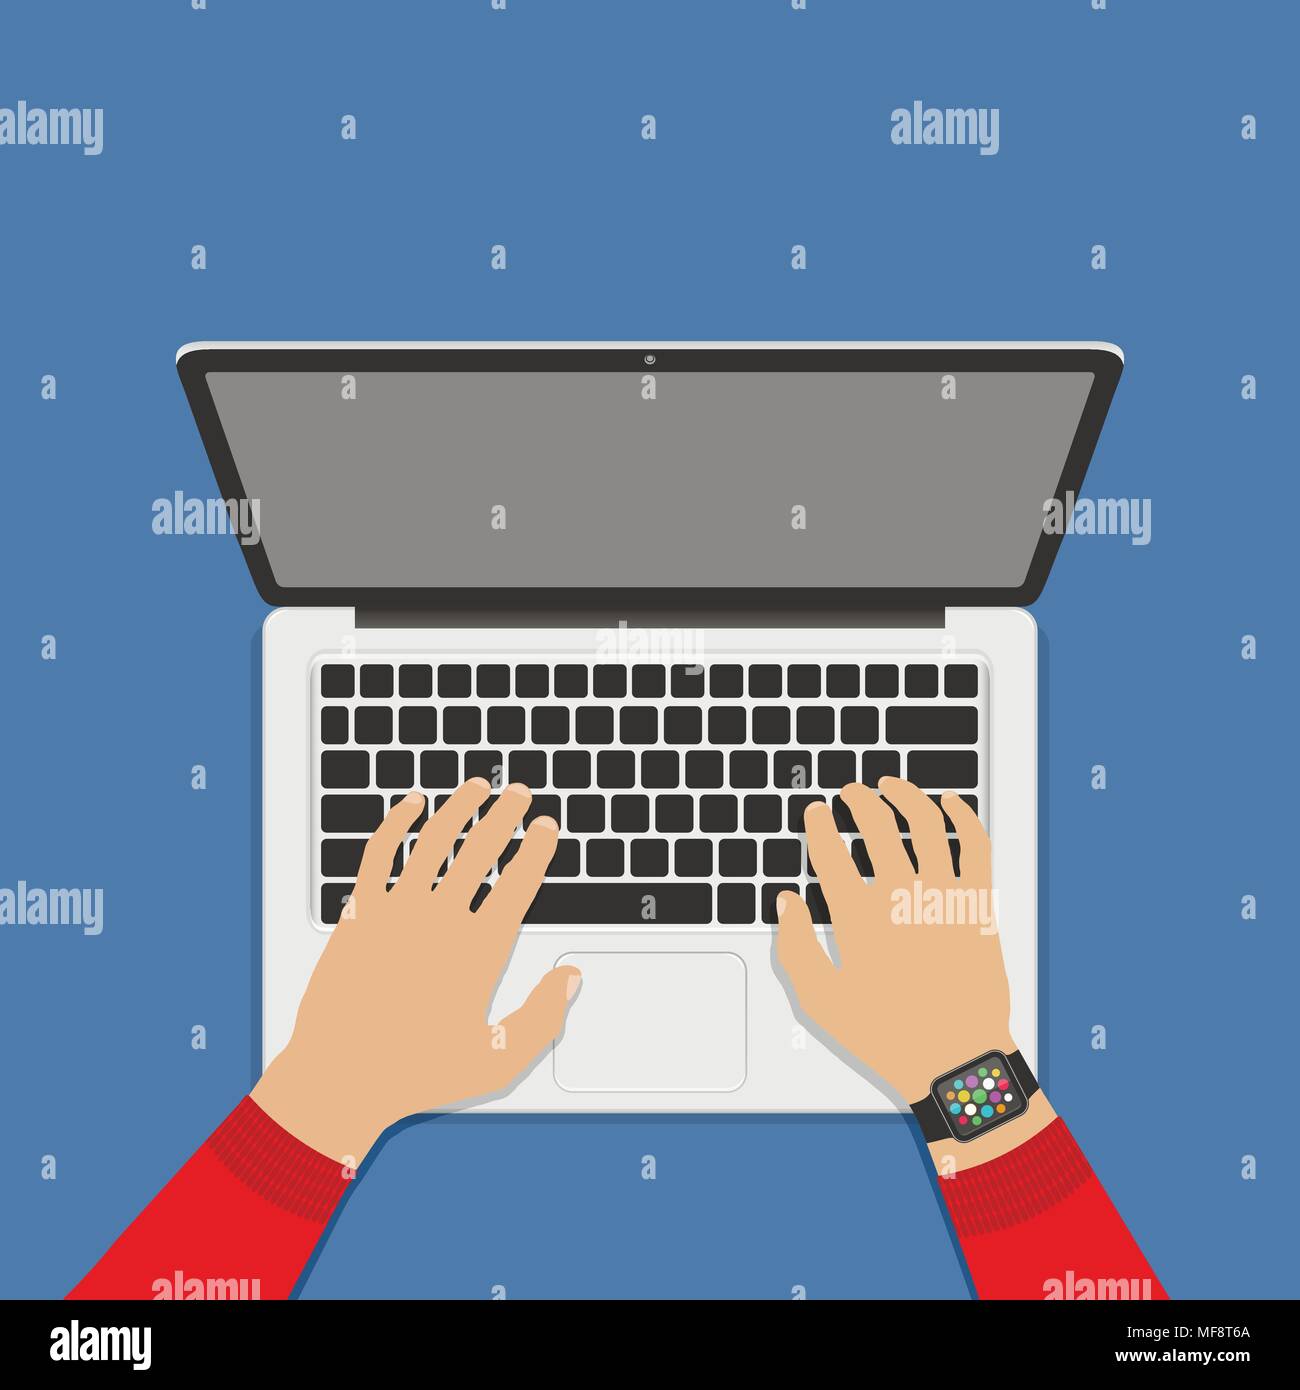 Hands on laptop keyboard with blank screen monitor. Flat style vector illustration. Stock Vector